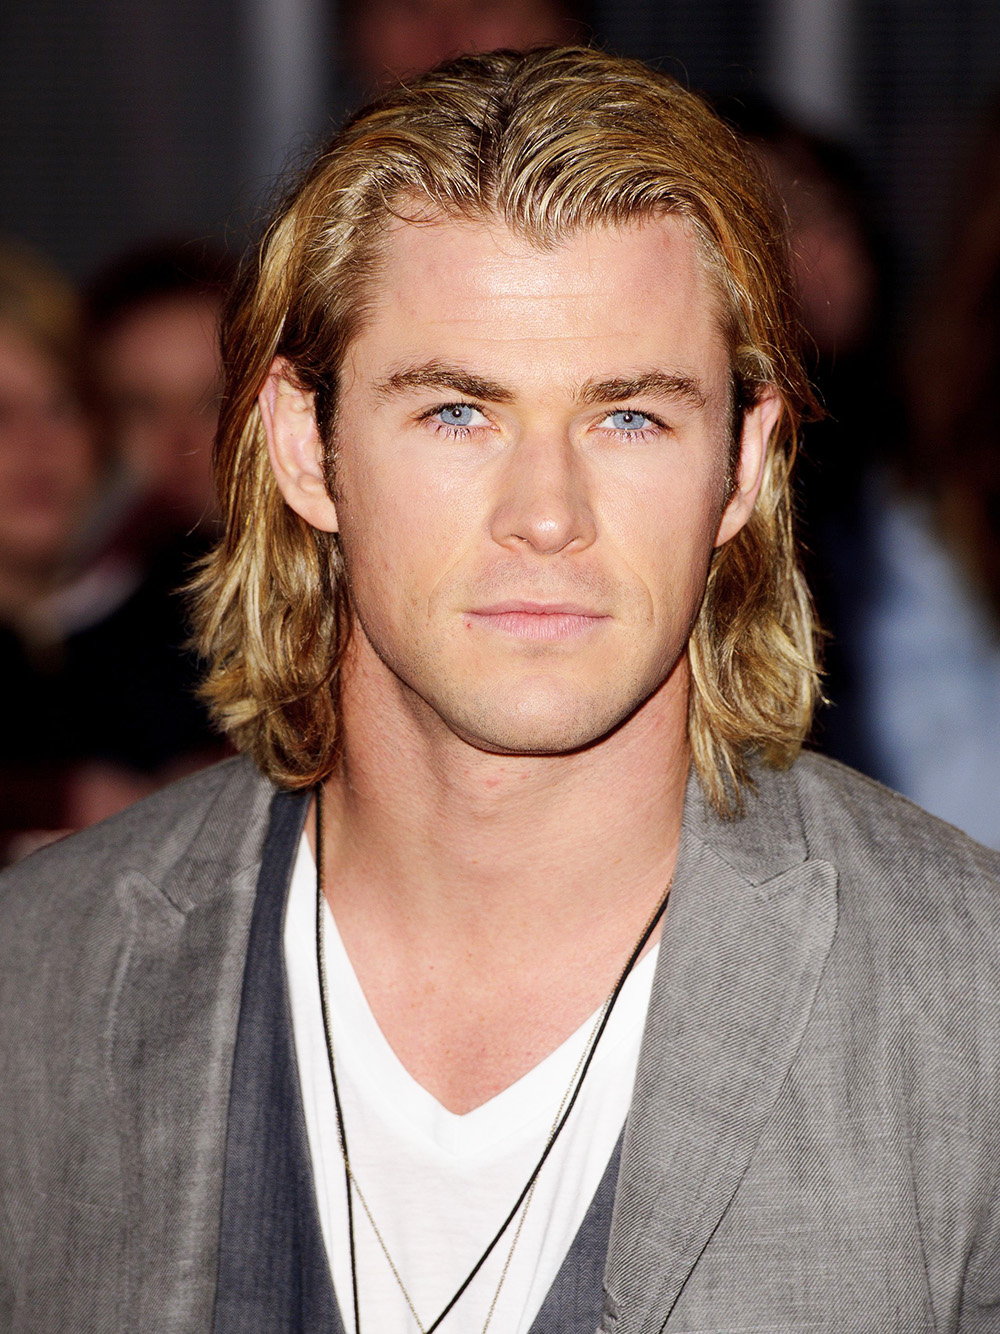 Pictures of Chris Hemsworth hair and long hairstyle of Thor